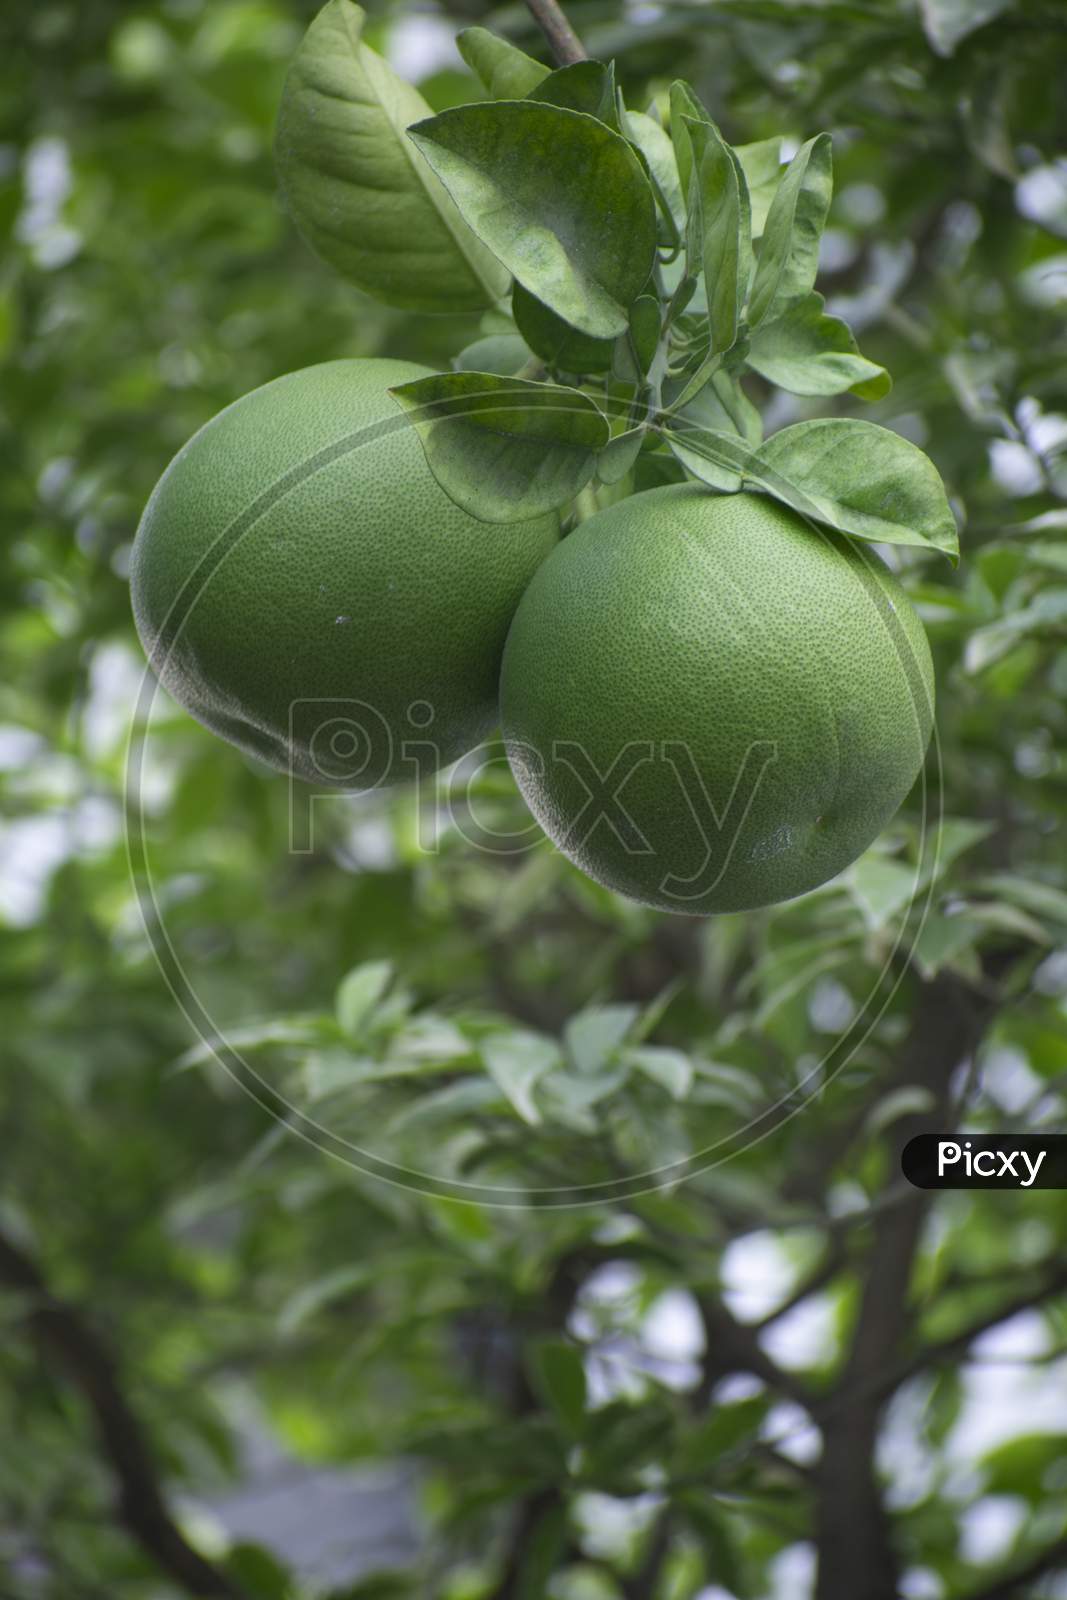 The Pomelo, Pummelo, Or In Scientific Terms Citrus Maxima Or Citrus Grandis, Is The Largest Citrus Fruit From The Family Rutaceae And The Principal Ancestor Of The Grapefruit